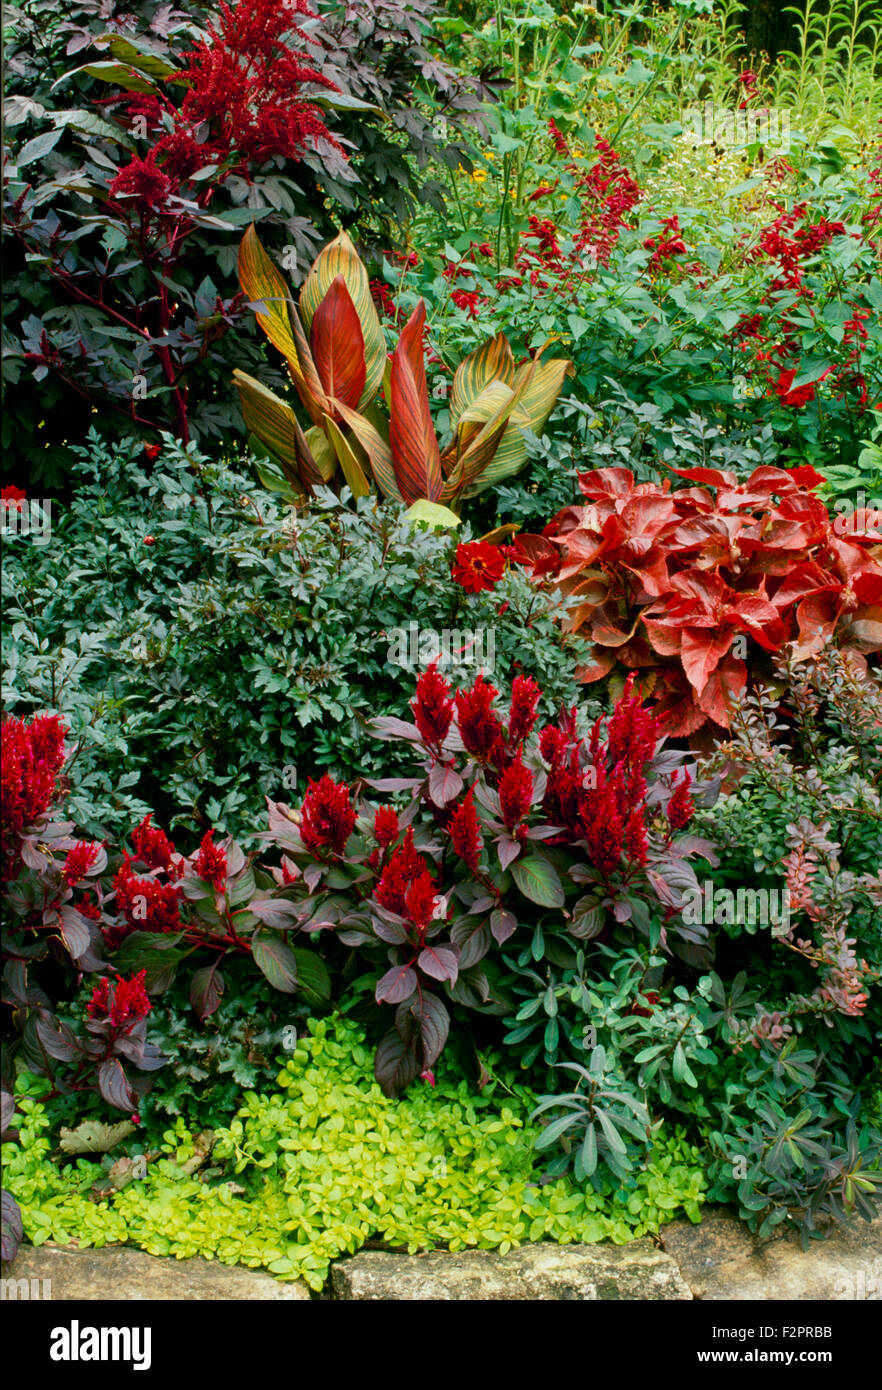 Red flowers and foliage in landscape garden design with rock border, Columbia Missouri USA Stock Photo